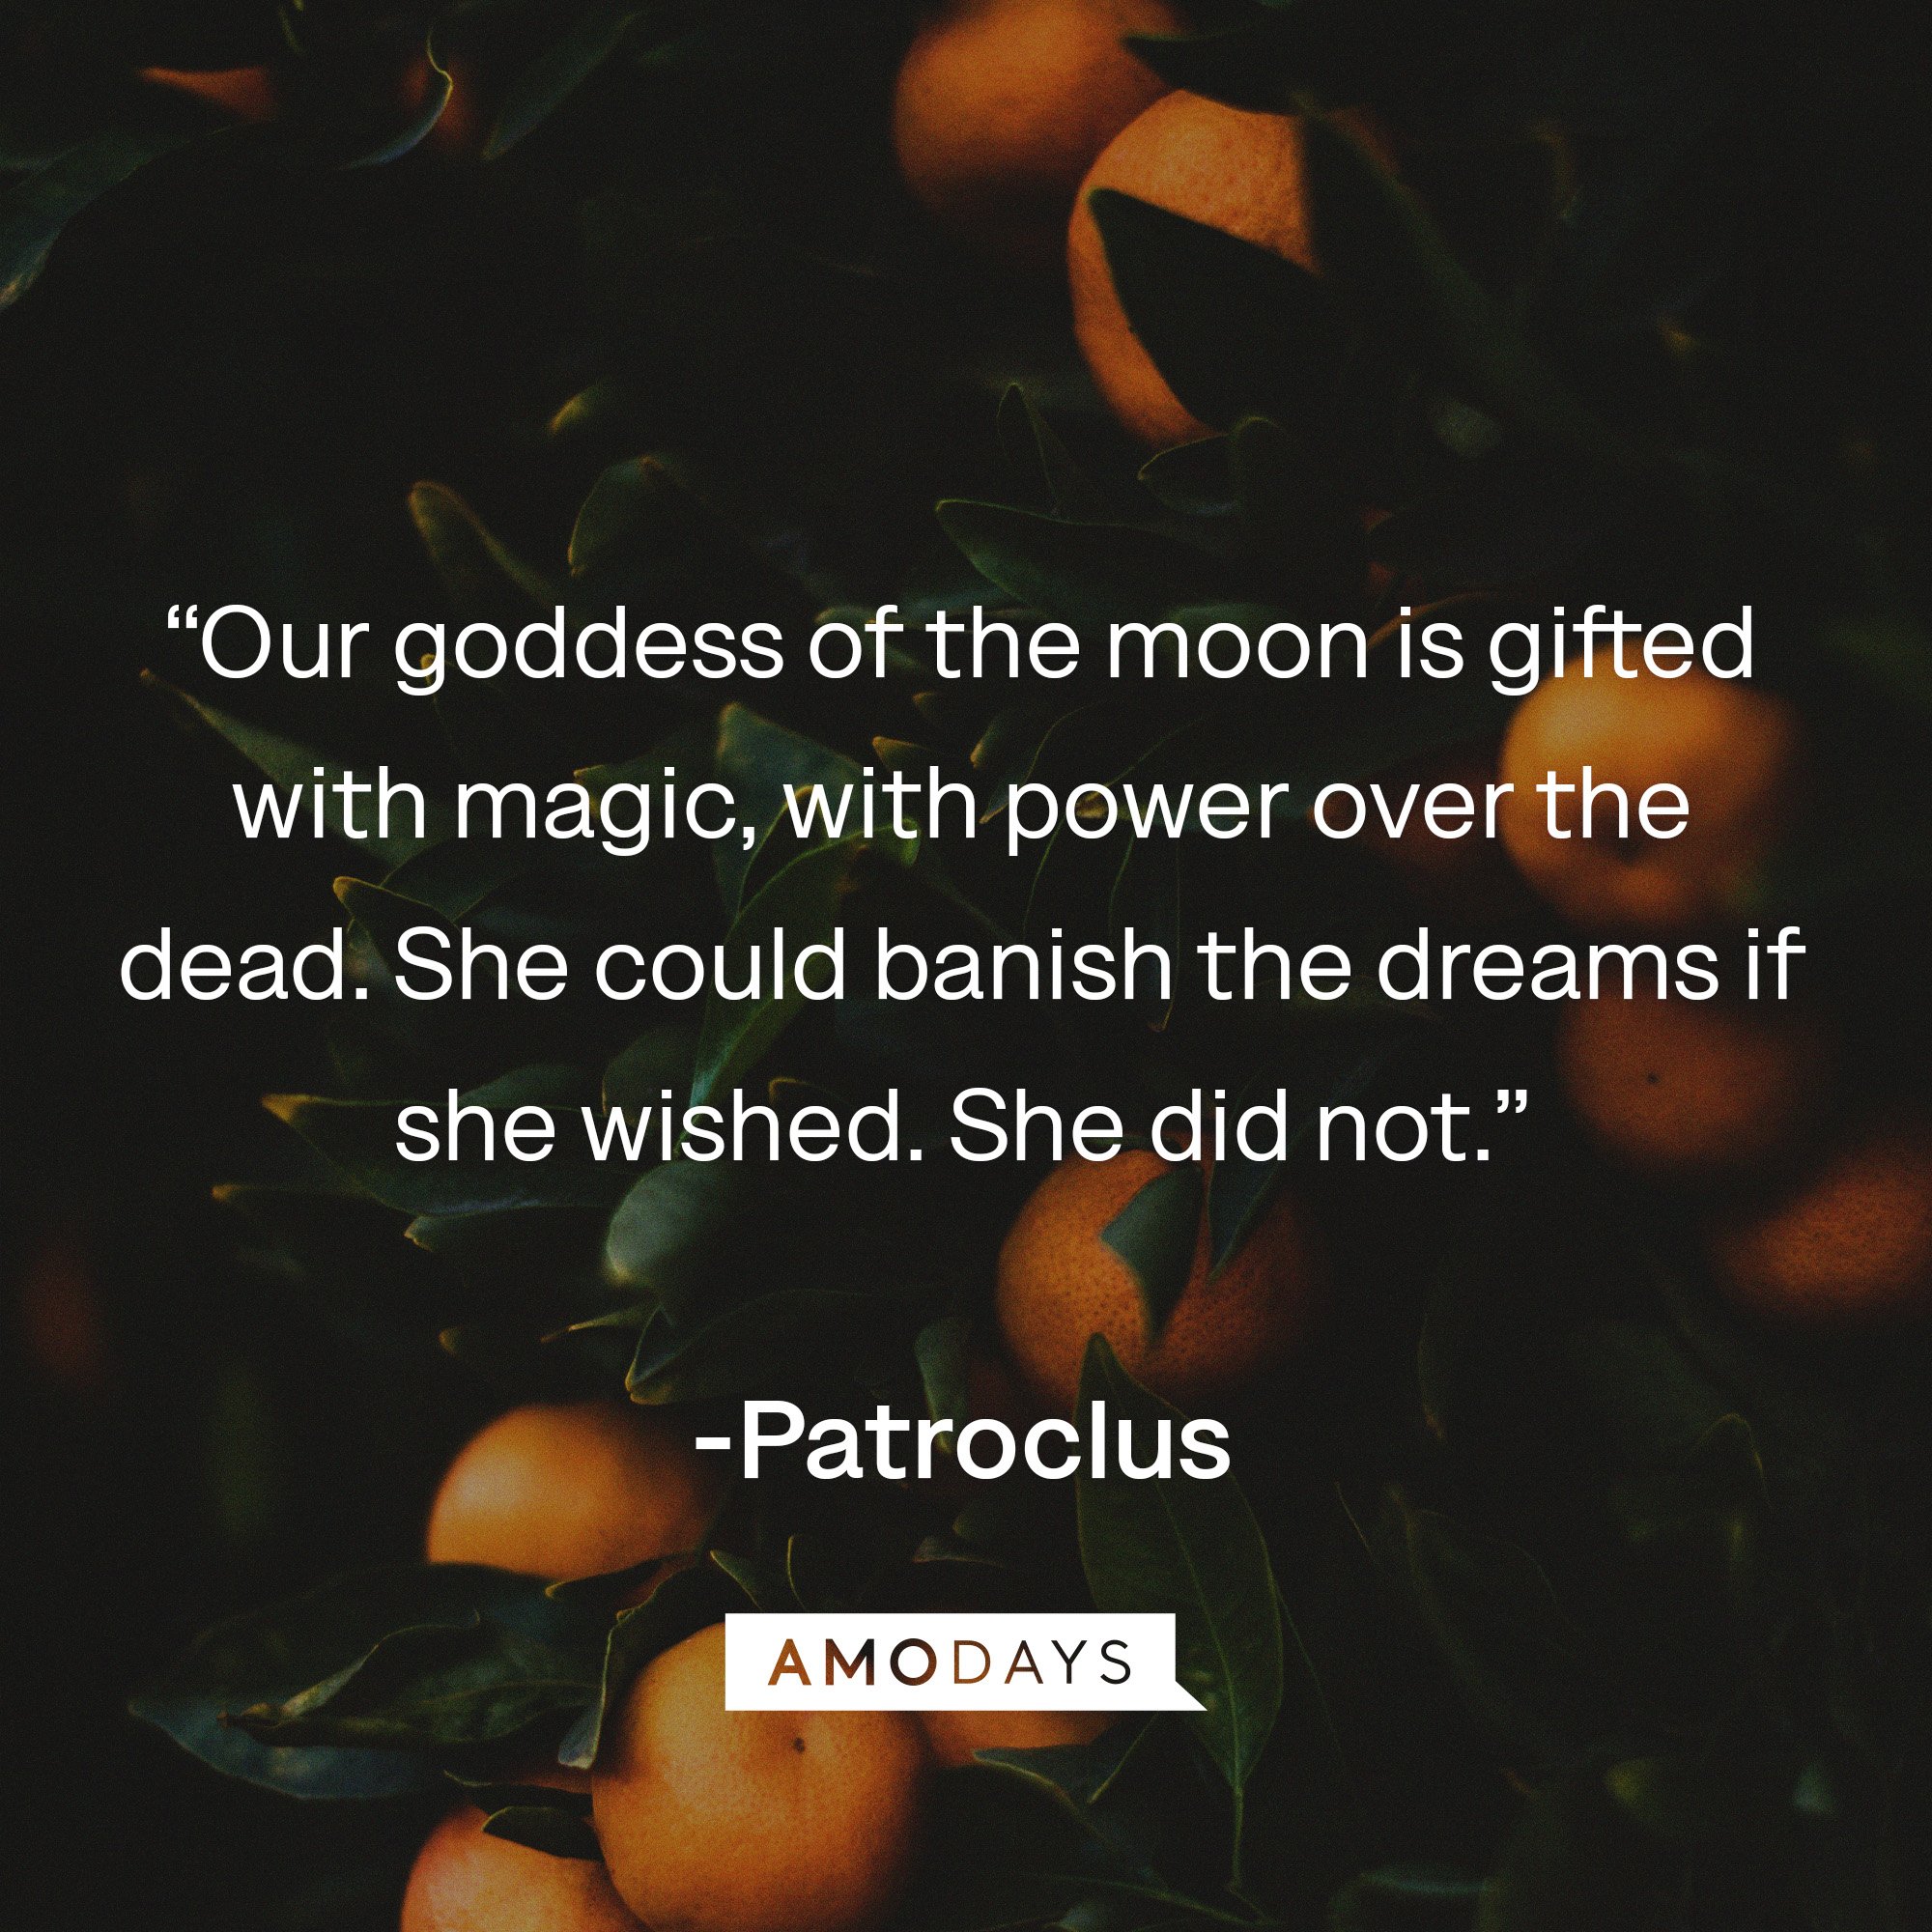  Patroclus's quote:  “Our goddess of the moon is gifted with magic, with power over the dead. She could banish the dreams if she wished. She did not.” | Image: AmoDays